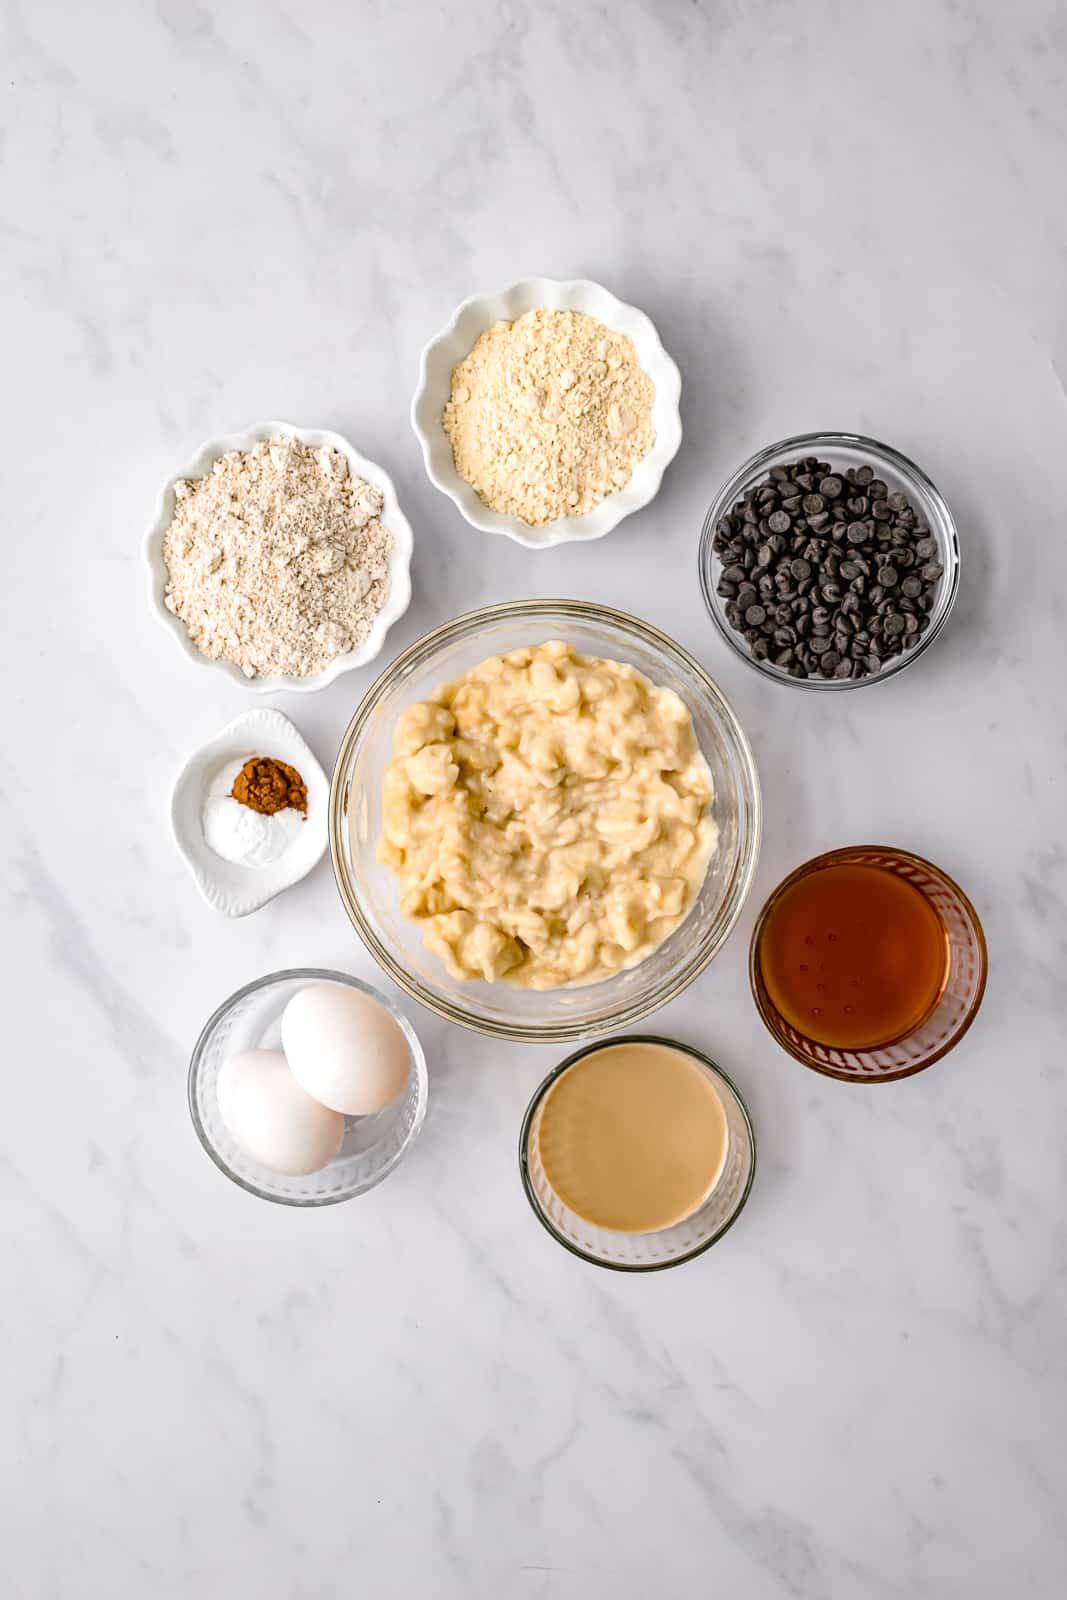 ingredients for muffins.